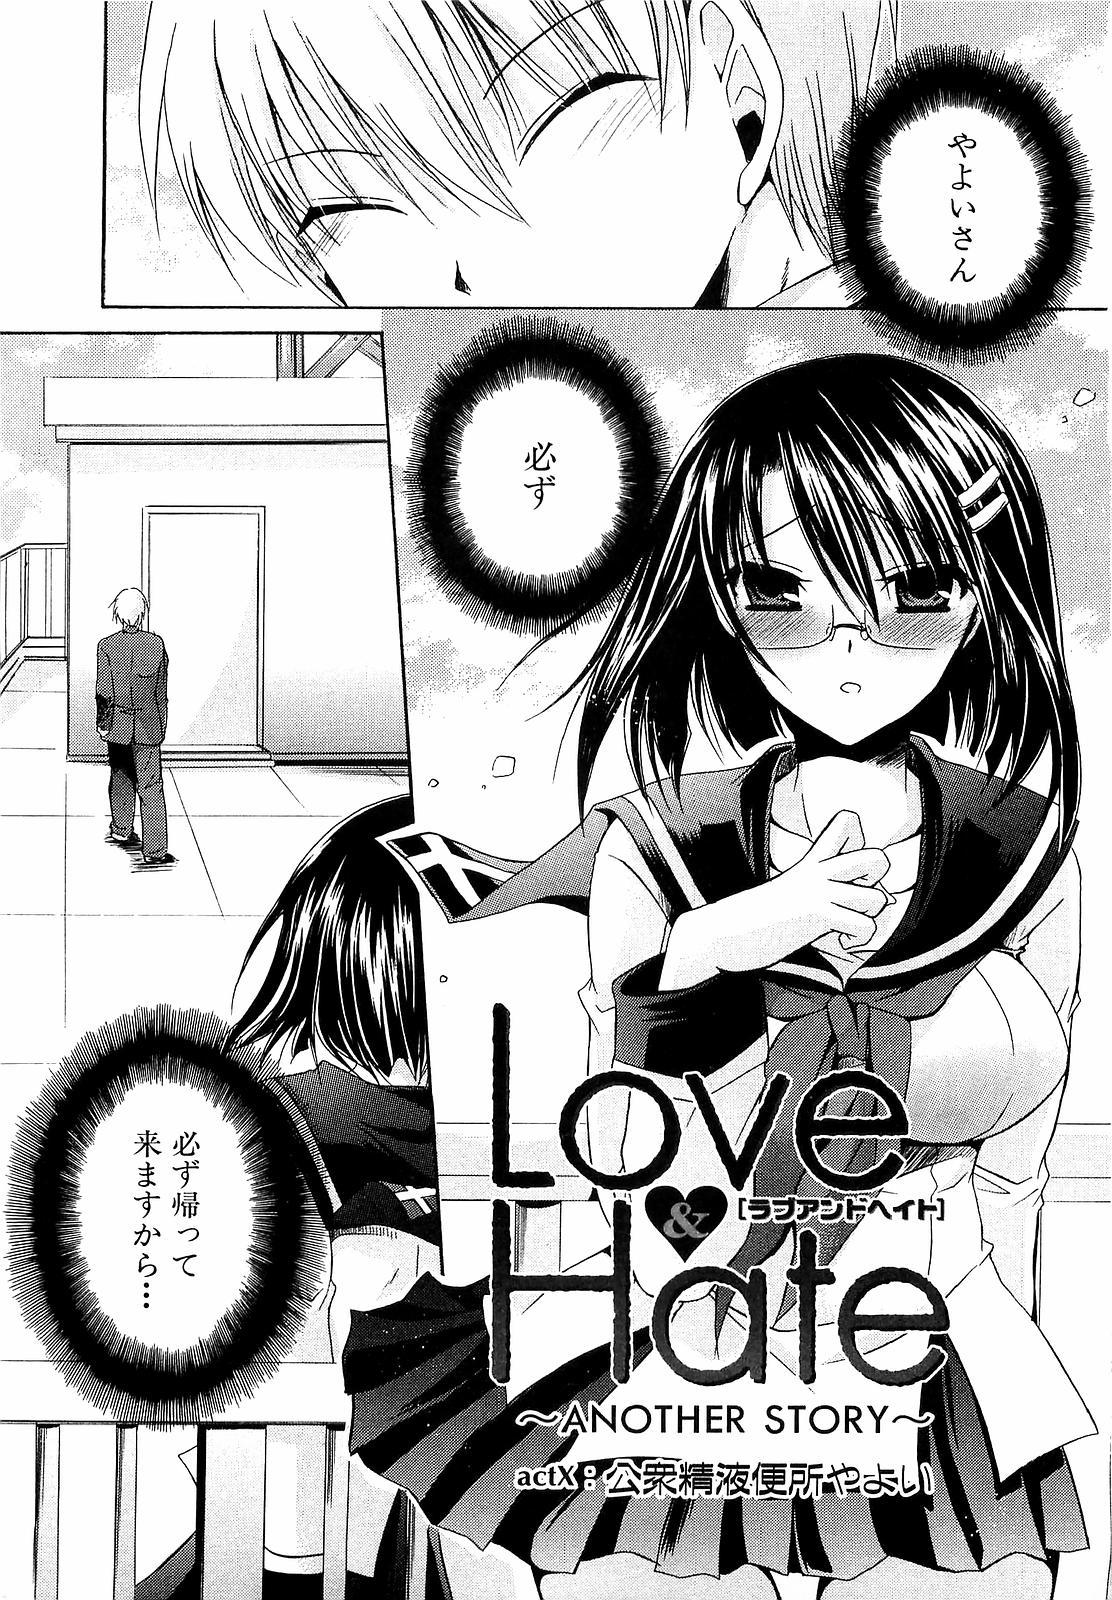 LOVE ＆ HATE 3 ～Engage～ L＆H Special Issue 2